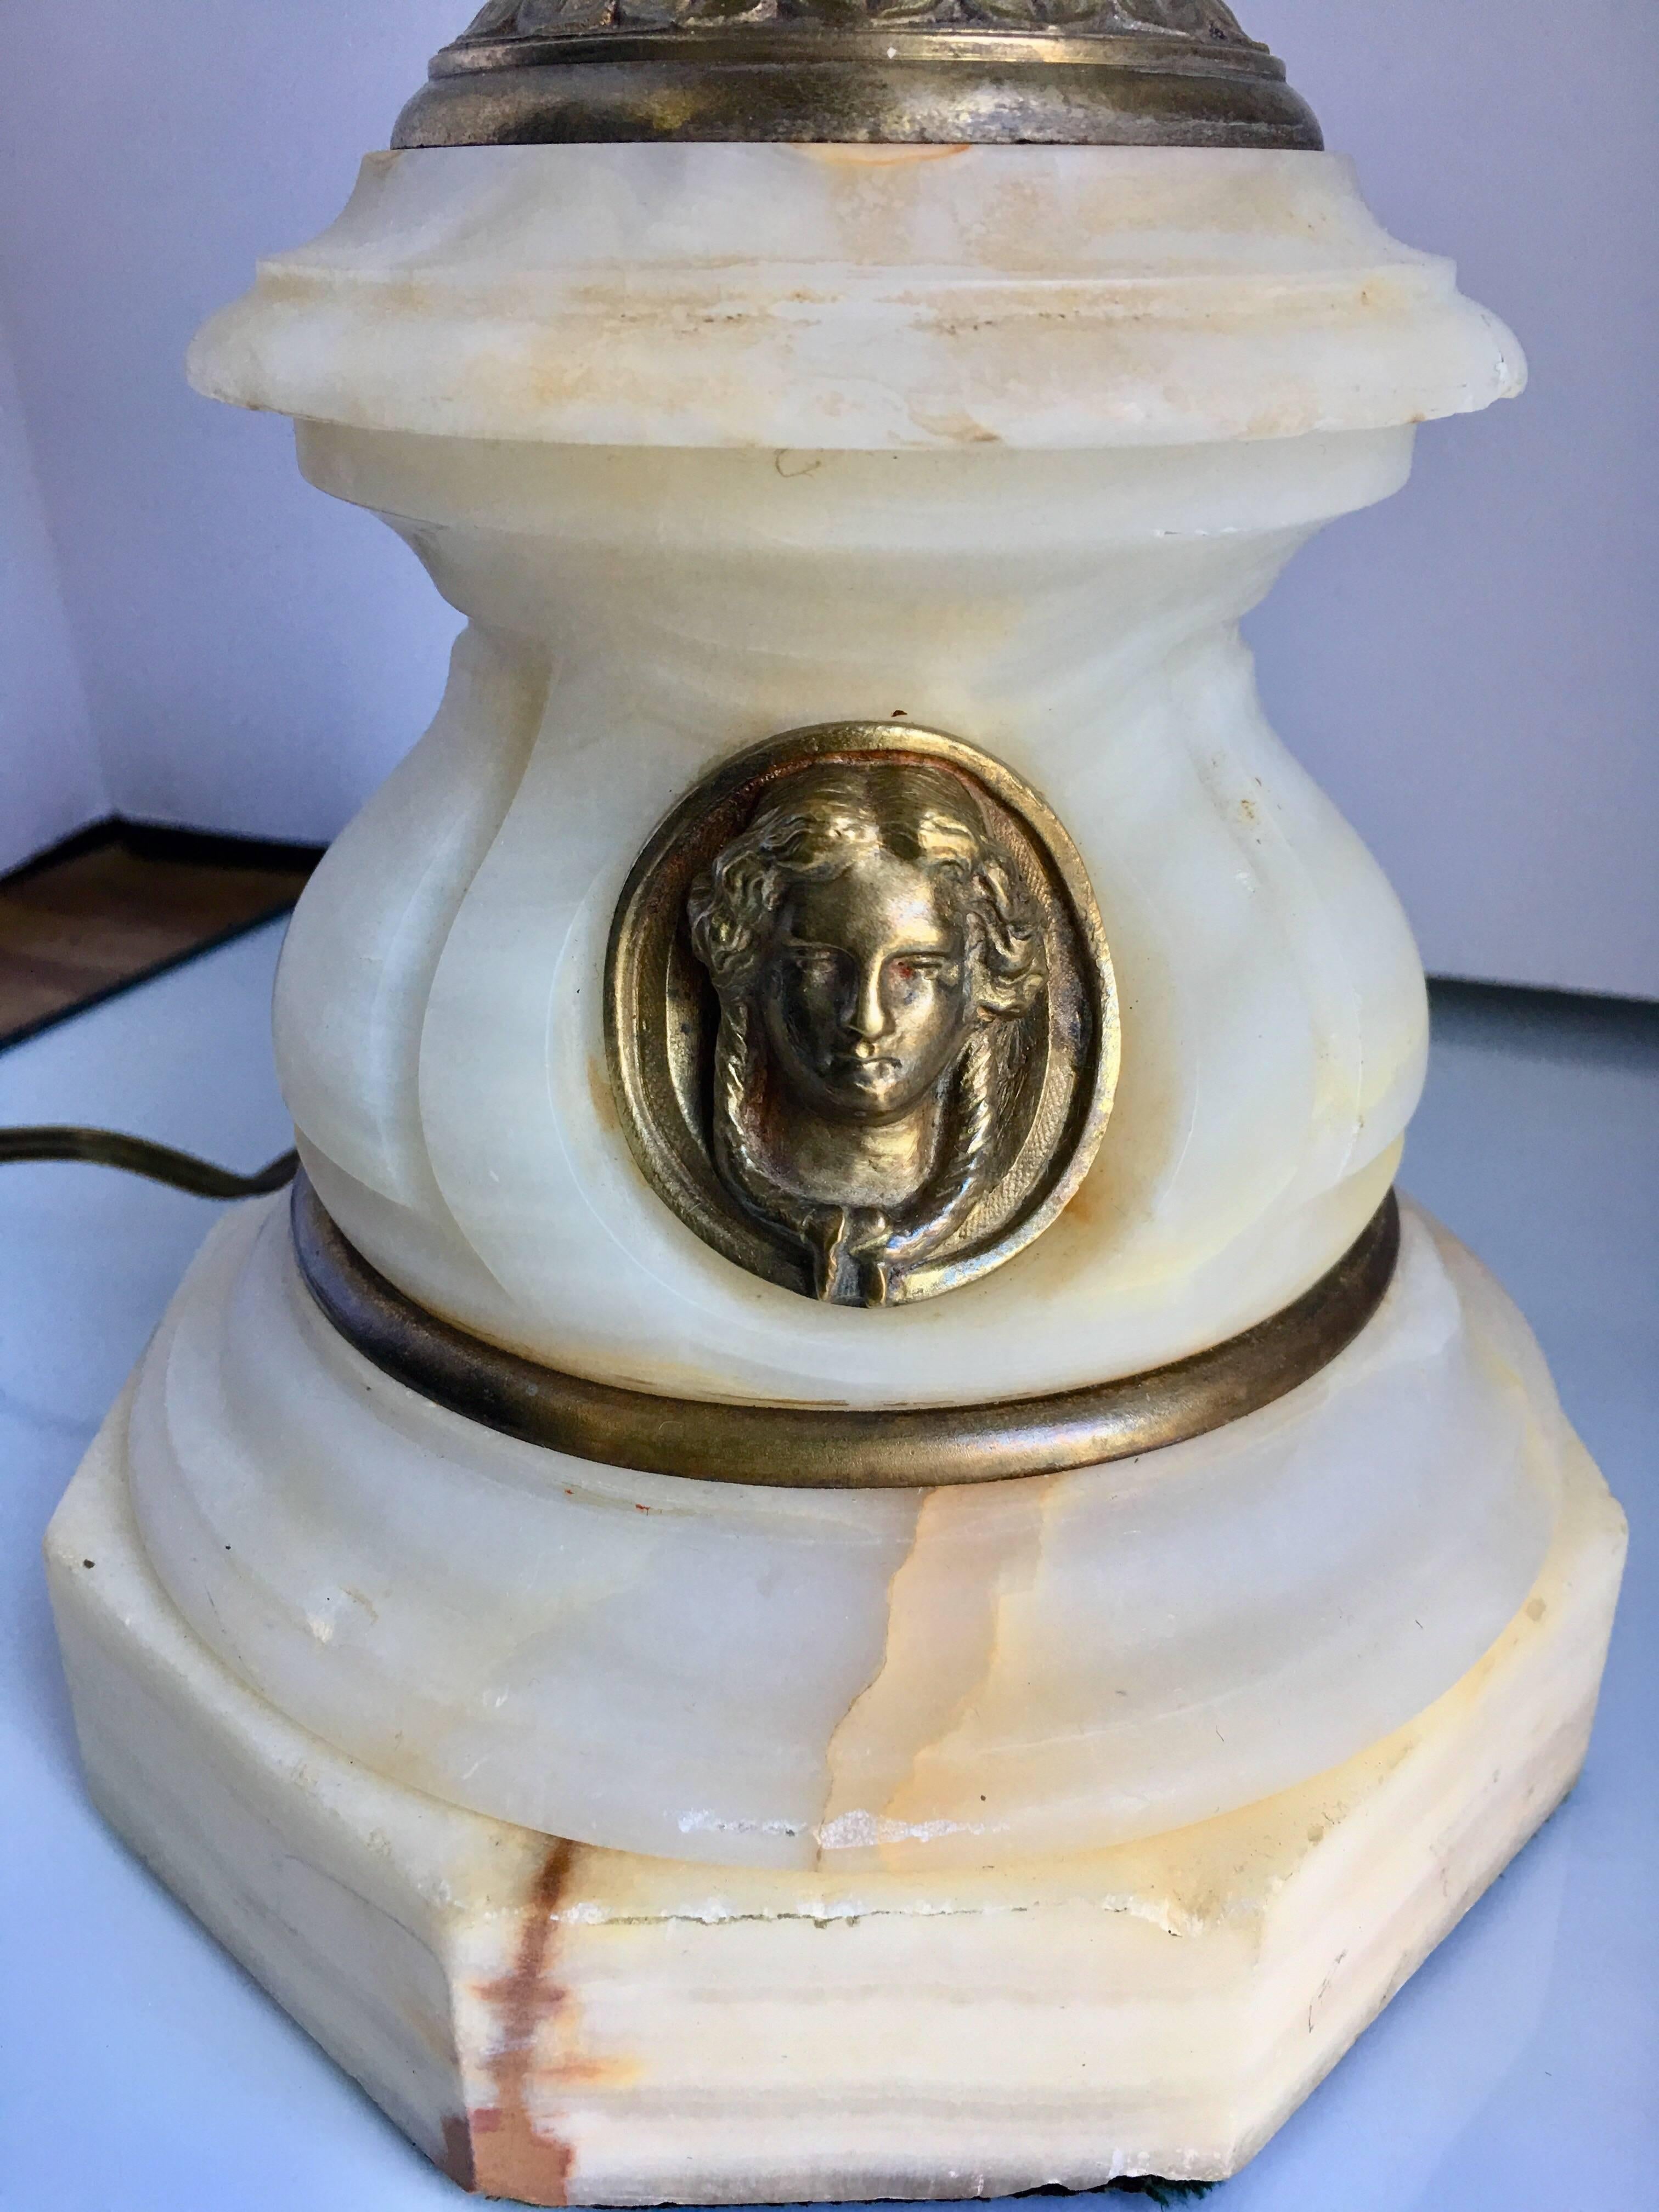 1920s neoclassical style French table lamp featuring a silver plated and brass handled urn mounted on an octagonal marble base with decorative figural bust, France, 1920s.
Lamp shade not included.